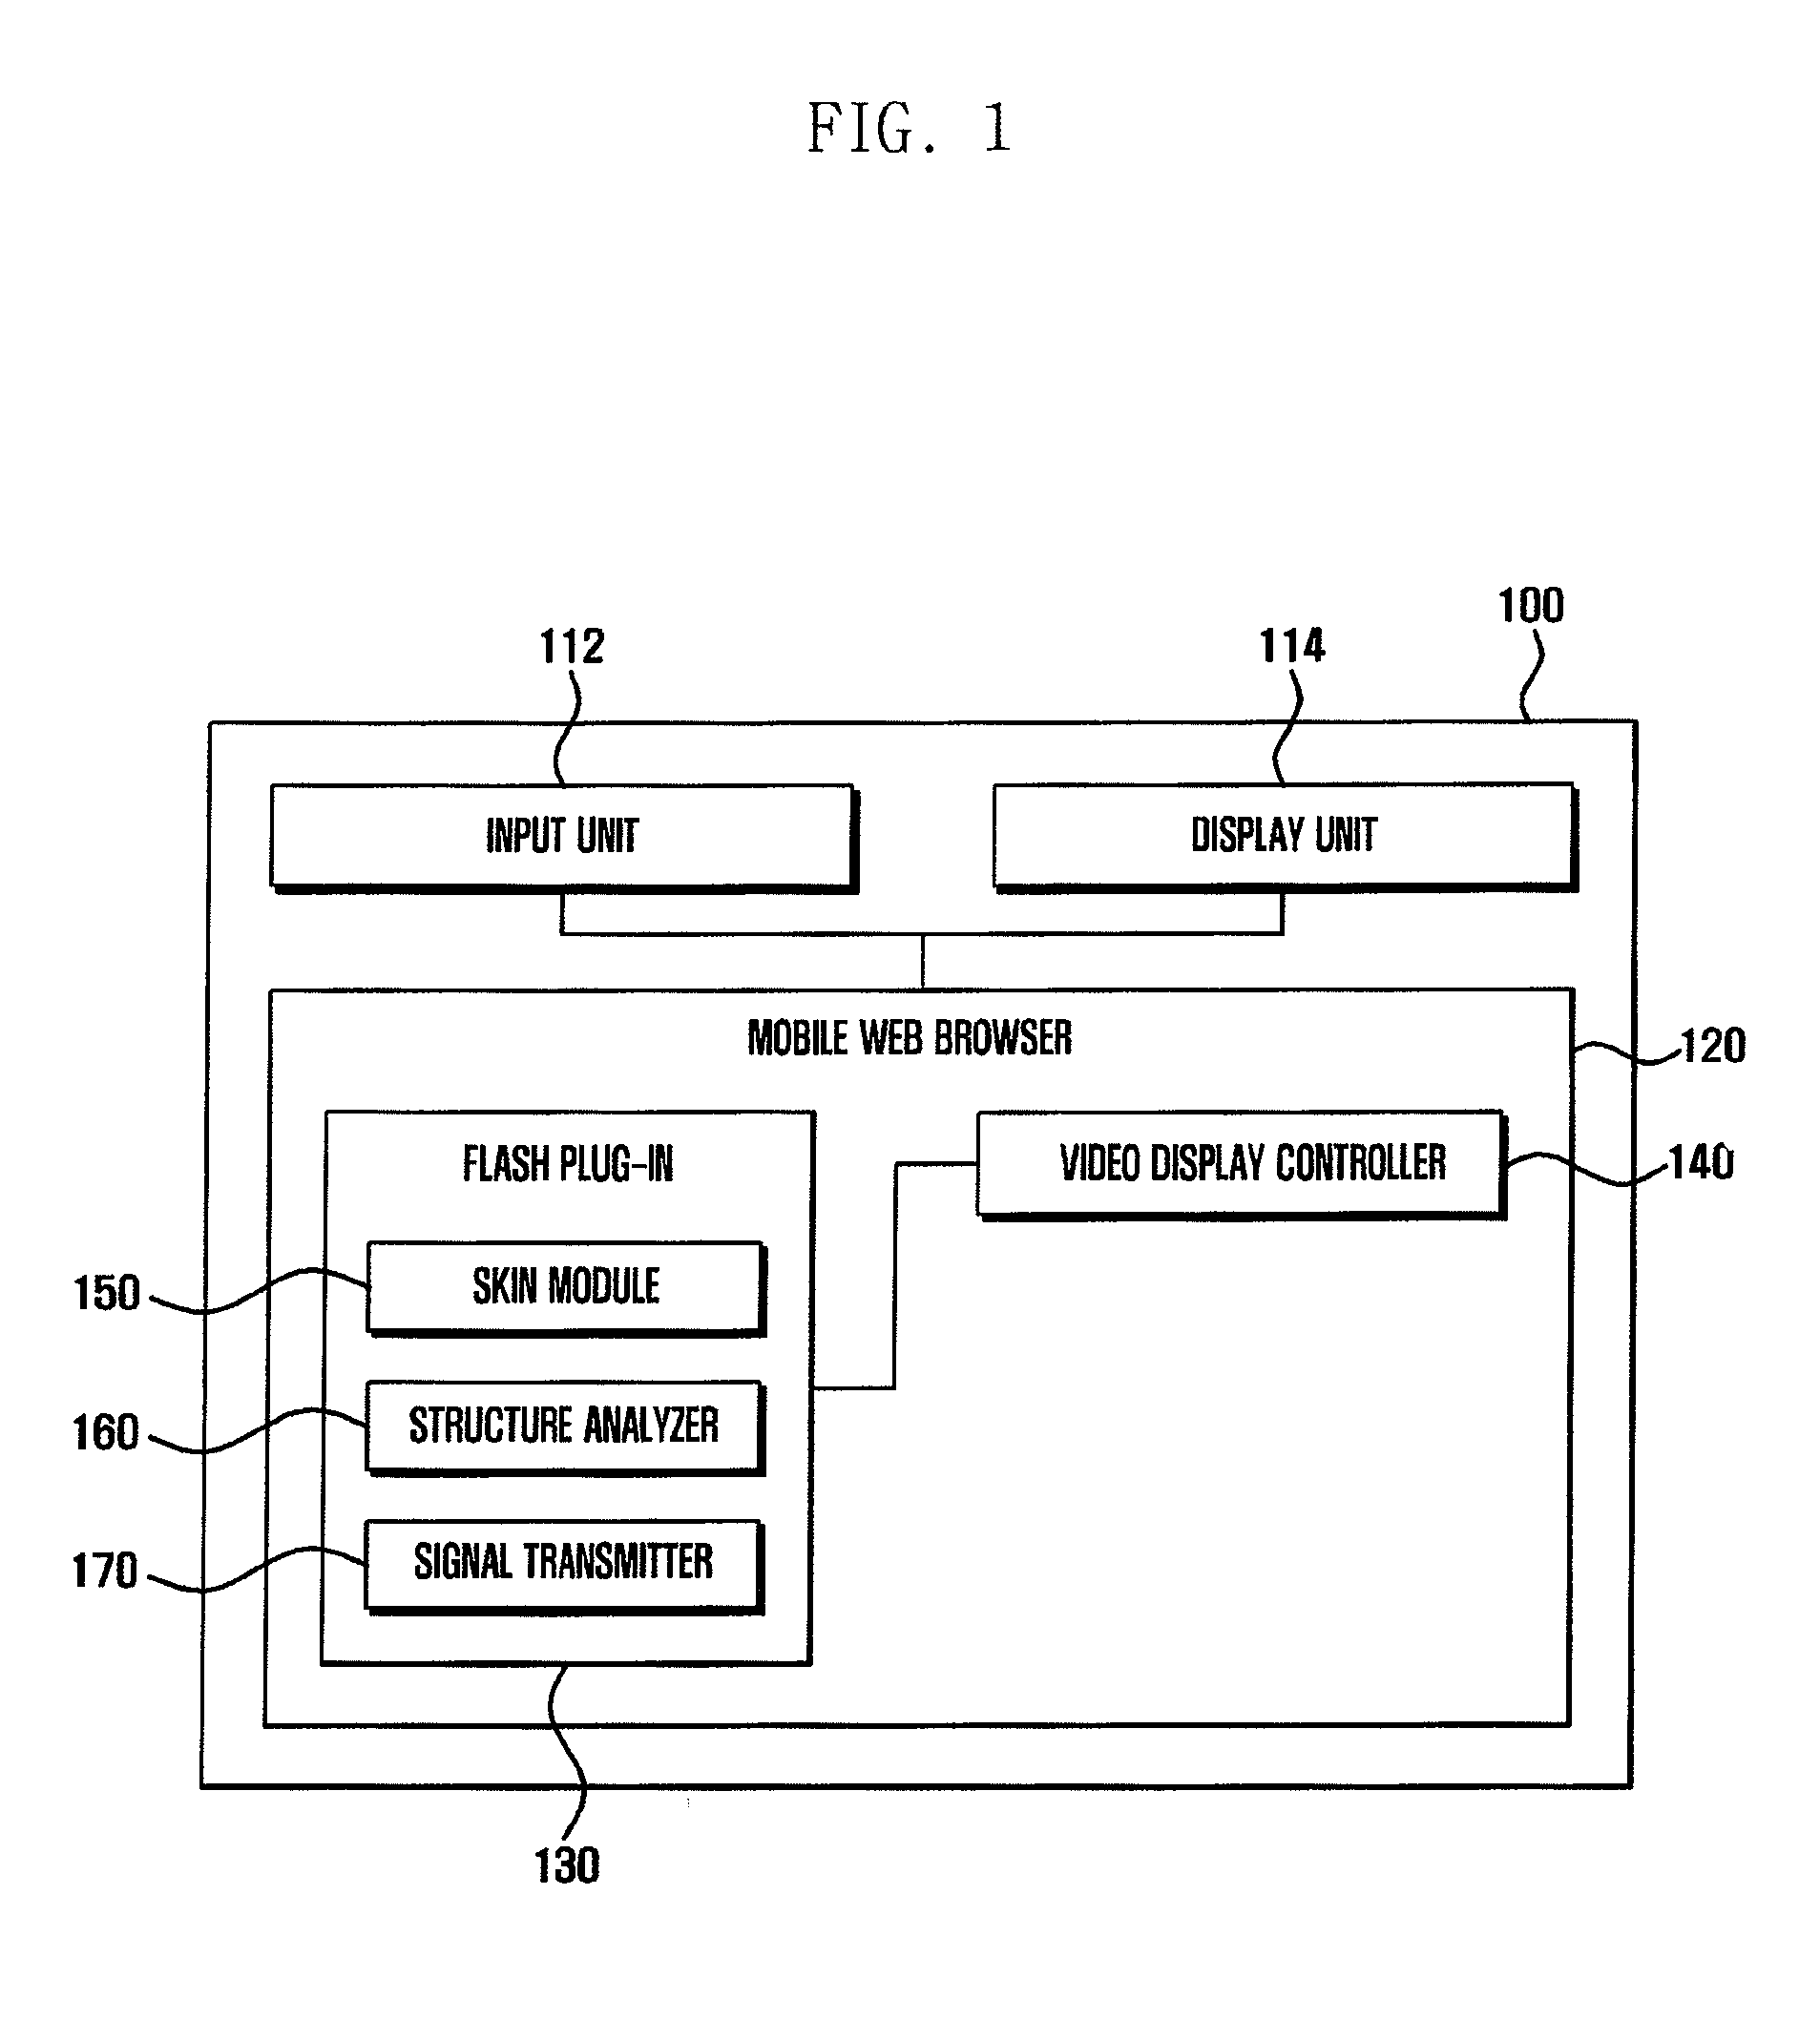 Apparatus and method for playback of flash-based video on mobile web browser